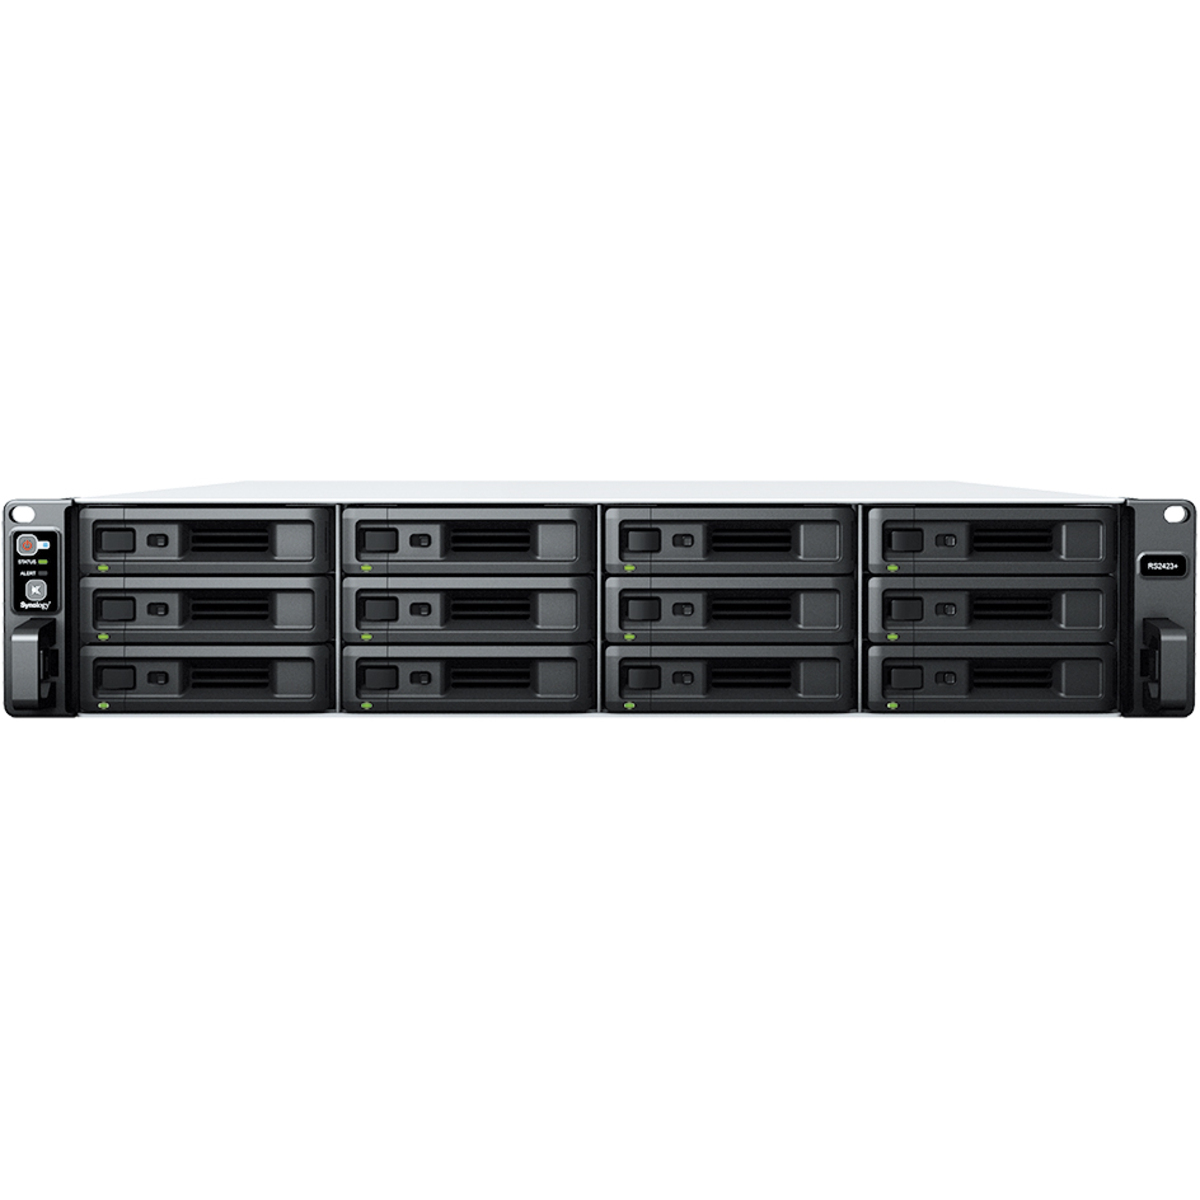 Synology RackStation RS2423+ 64tb 12-Bay RackMount Multimedia / Power User / Business NAS - Network Attached Storage Device 8x8tb Seagate IronWolf ST8000VN004 3.5 7200rpm SATA 6Gb/s HDD NAS Class Drives Installed - Burn-In Tested RackStation RS2423+